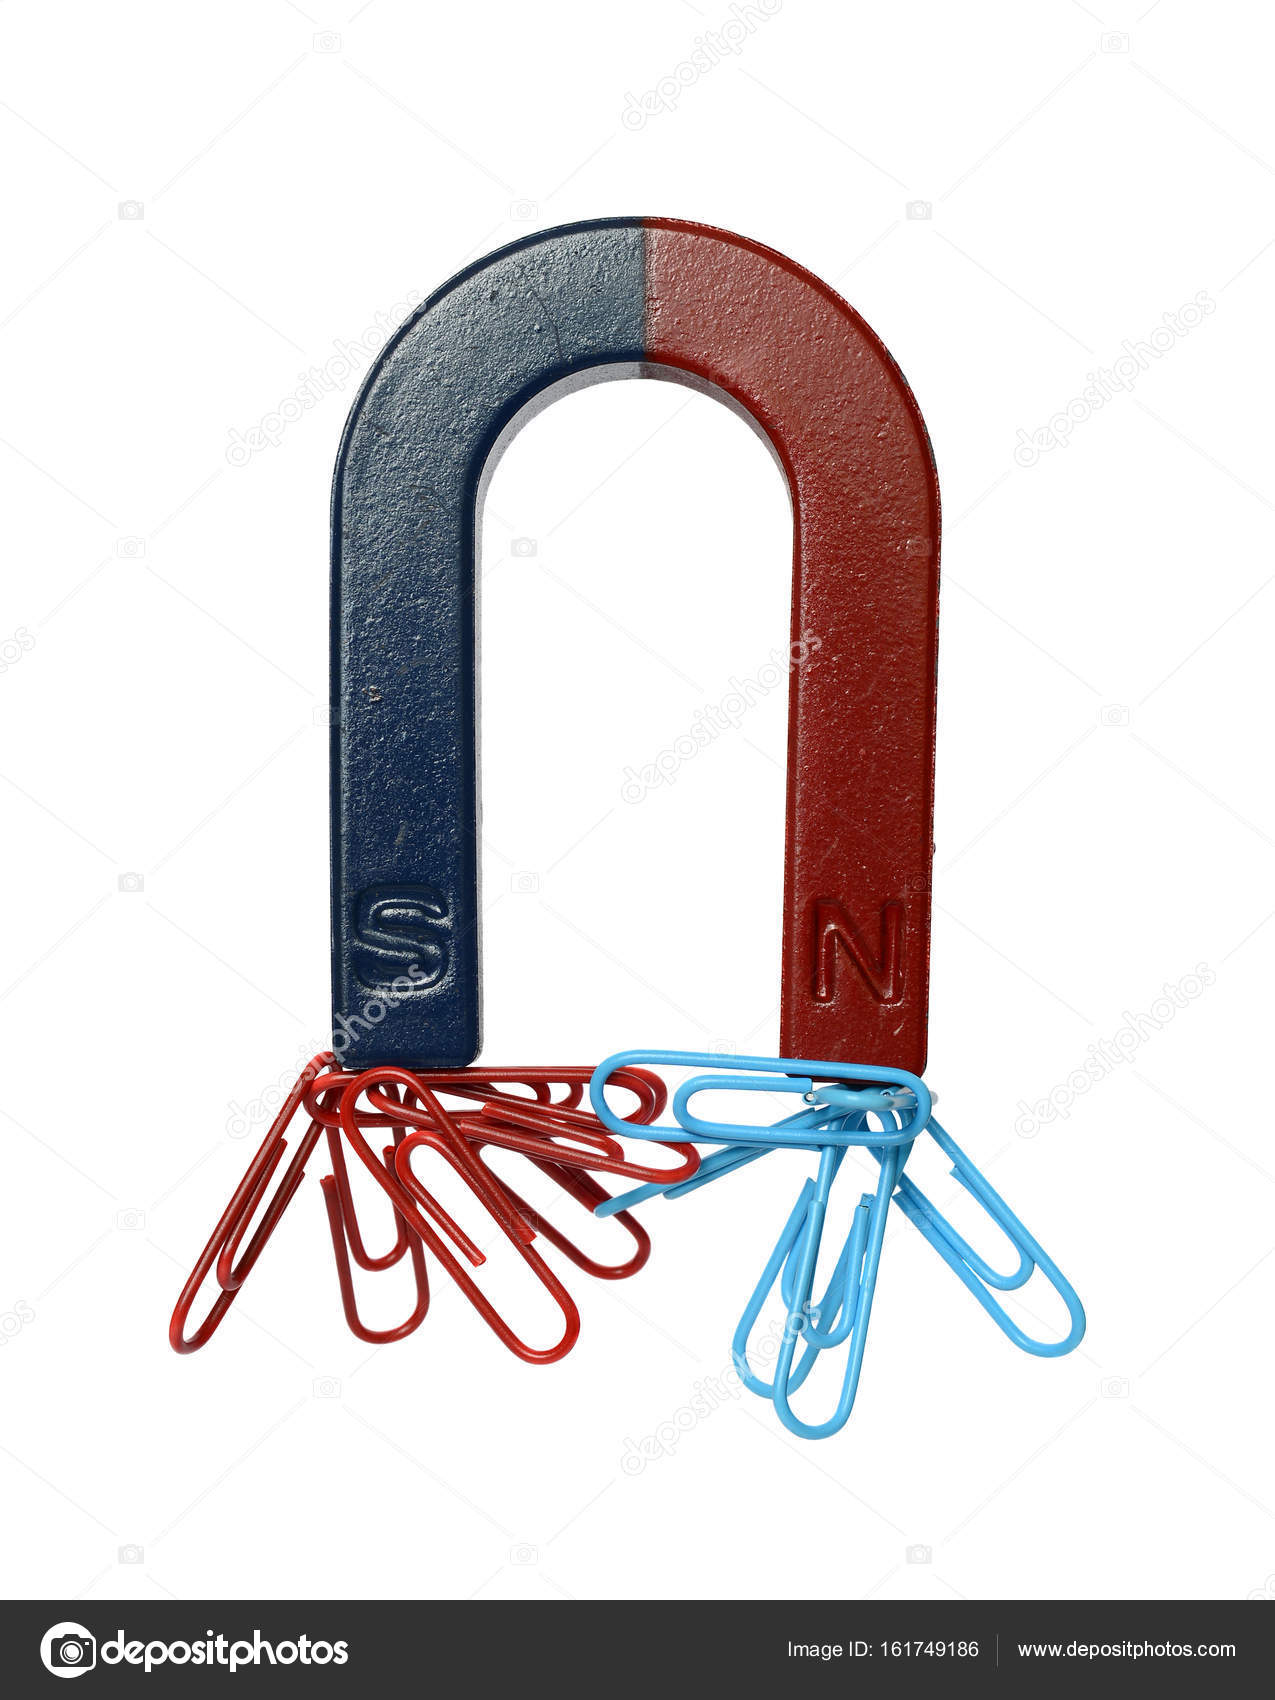 Magnet and paper clips Stock Photo by ©ivantcovlad 146981501